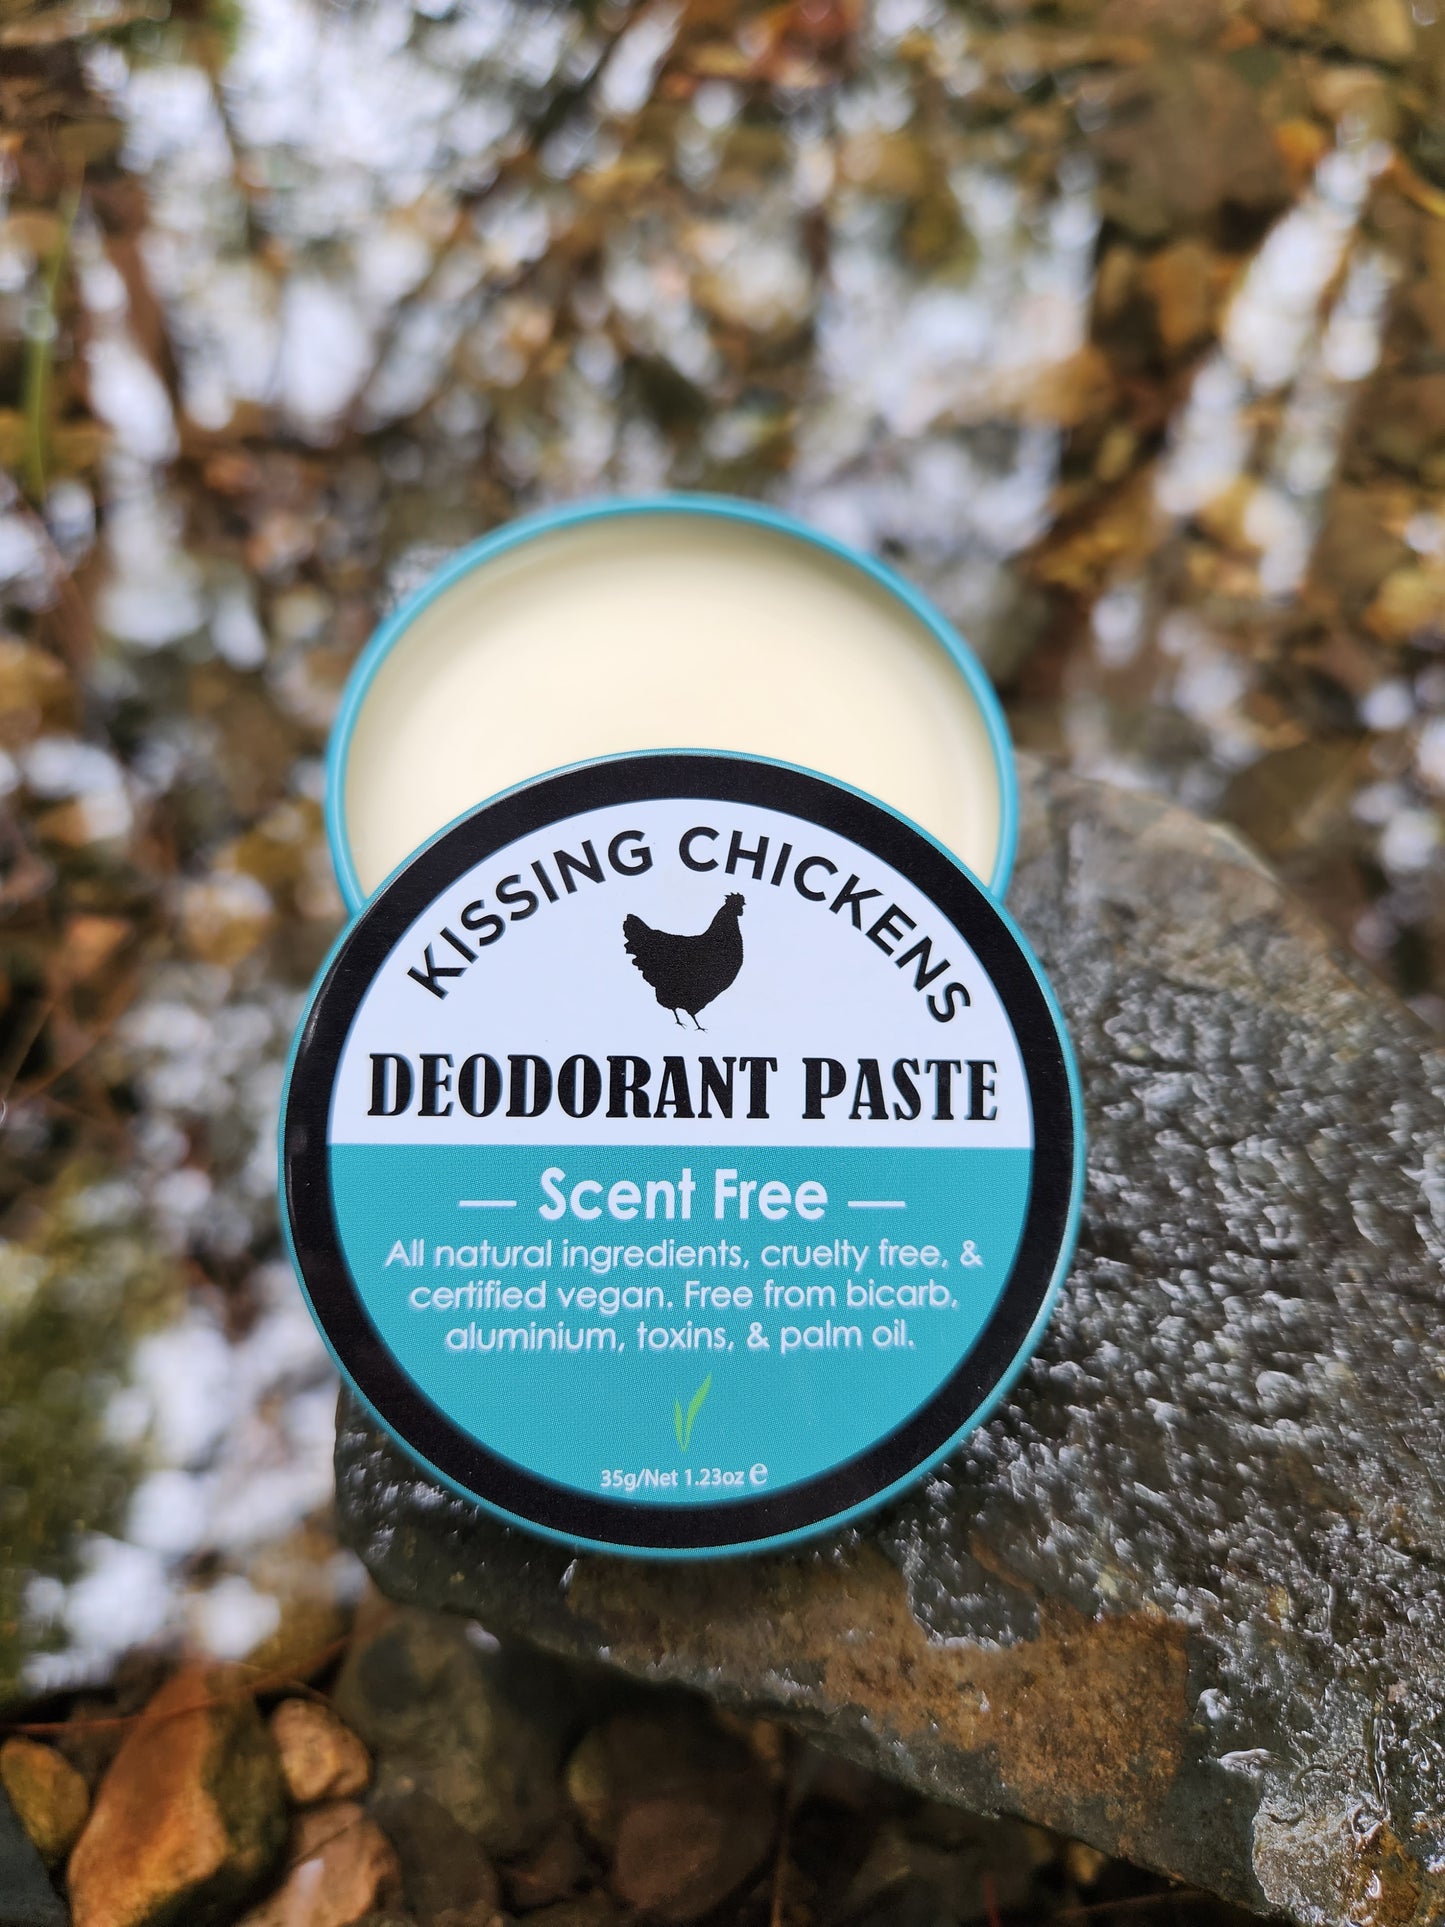 NEW! Kissing Chickens Bicarb-free Natural Deodorant Paste - Scent Free 35g tin